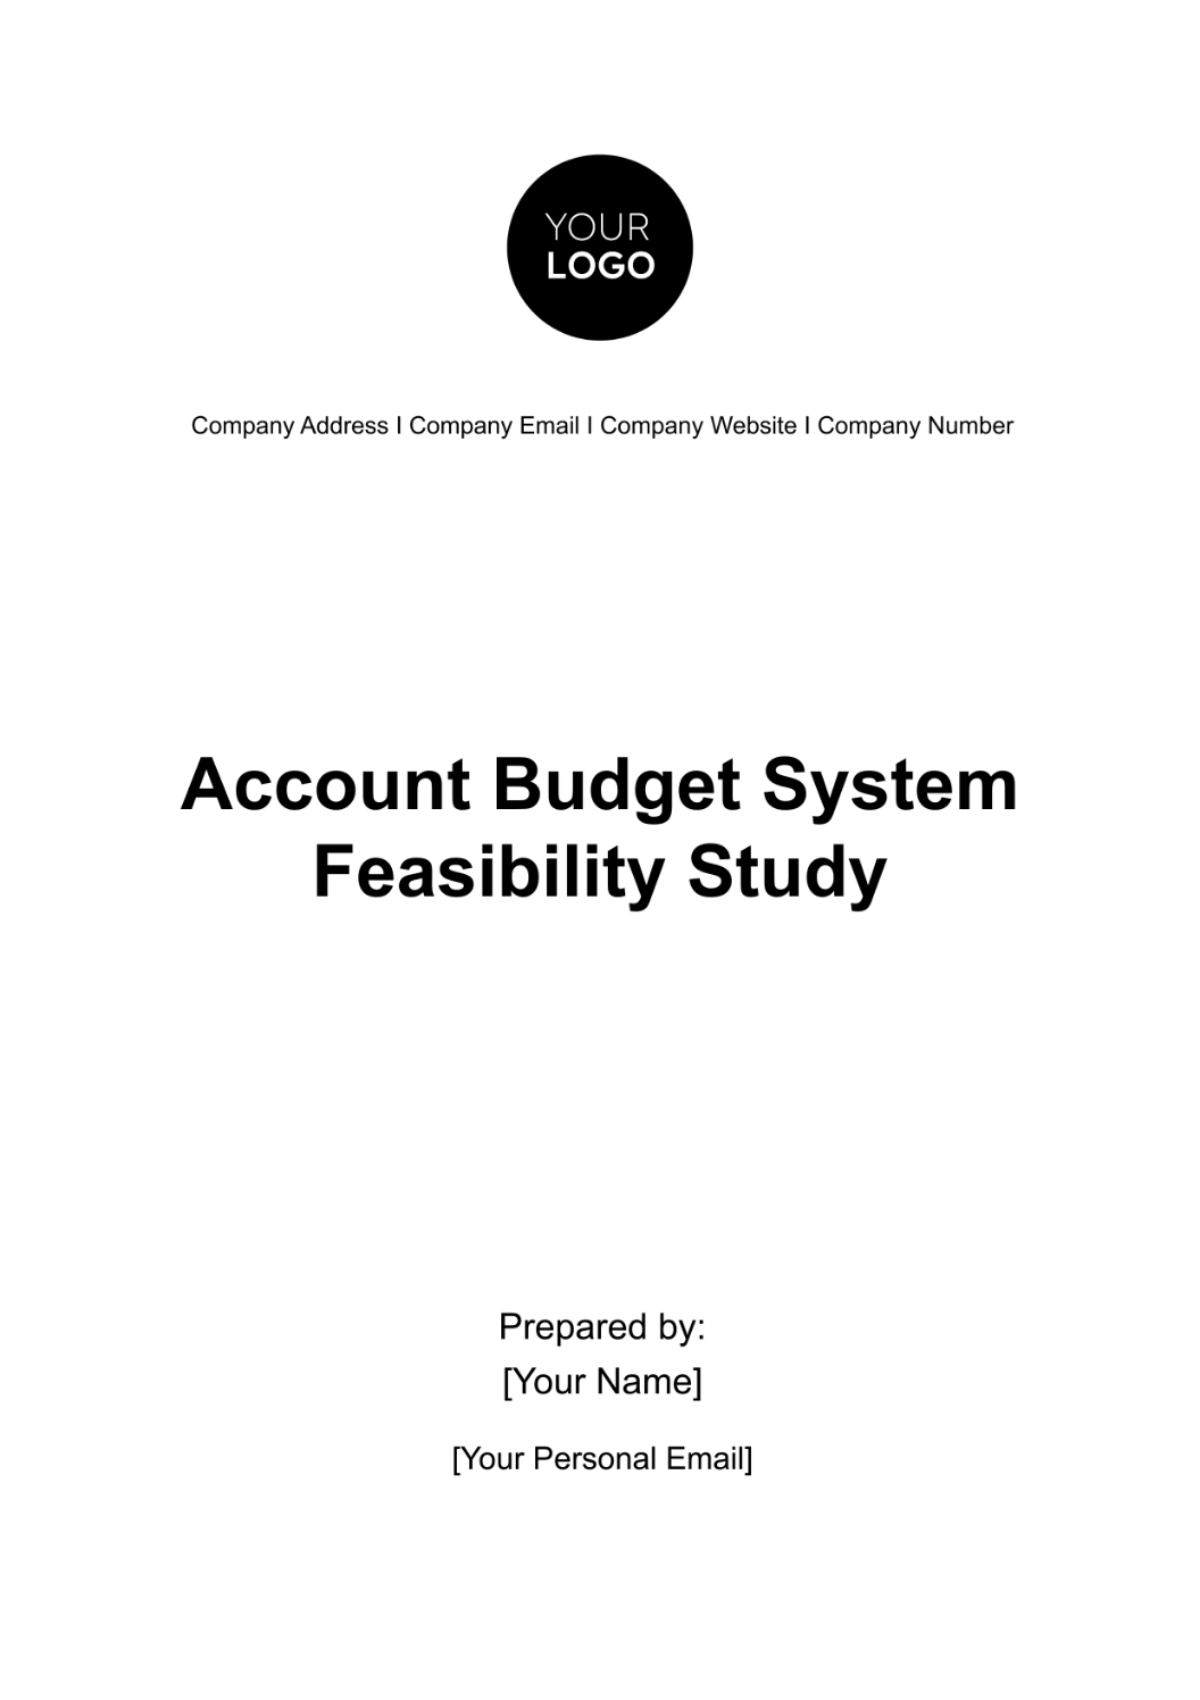 Free Account Budget System Feasibility Study Template